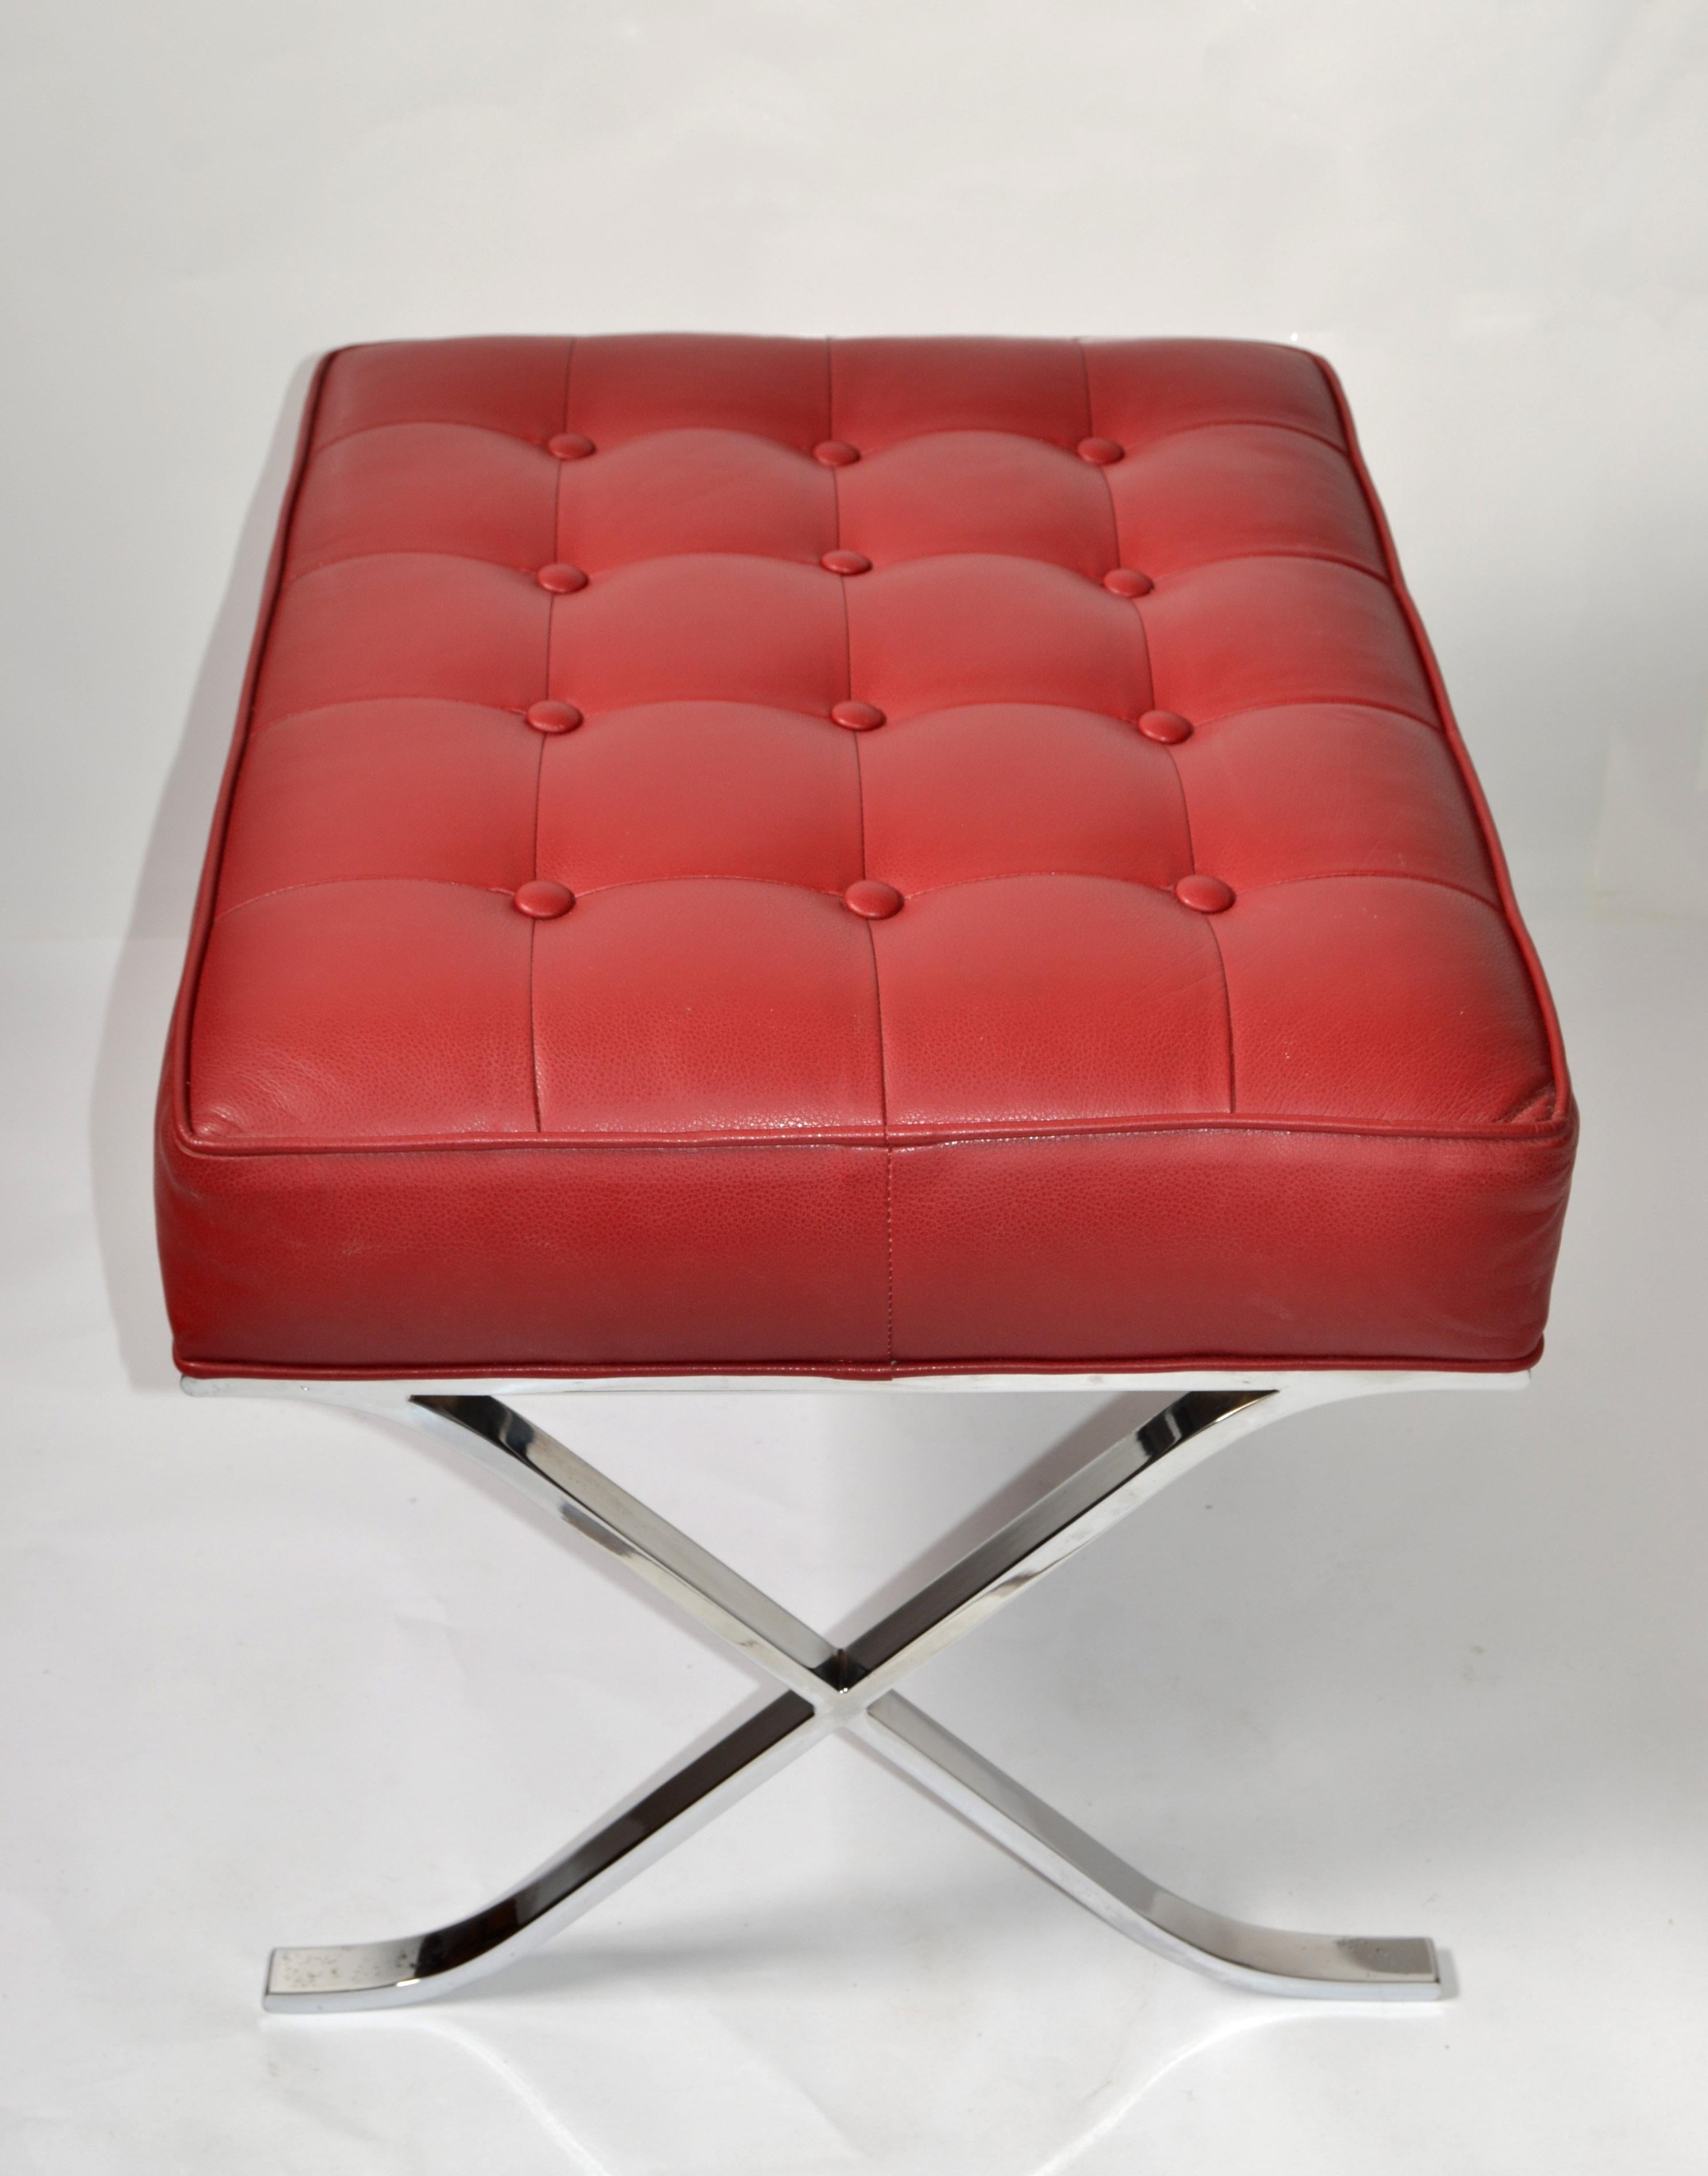 Polychromed Mies Van Der Rohe Style Barcelona Chromed Steel Red Vinyl Ottoman Footstool 1980 For Sale